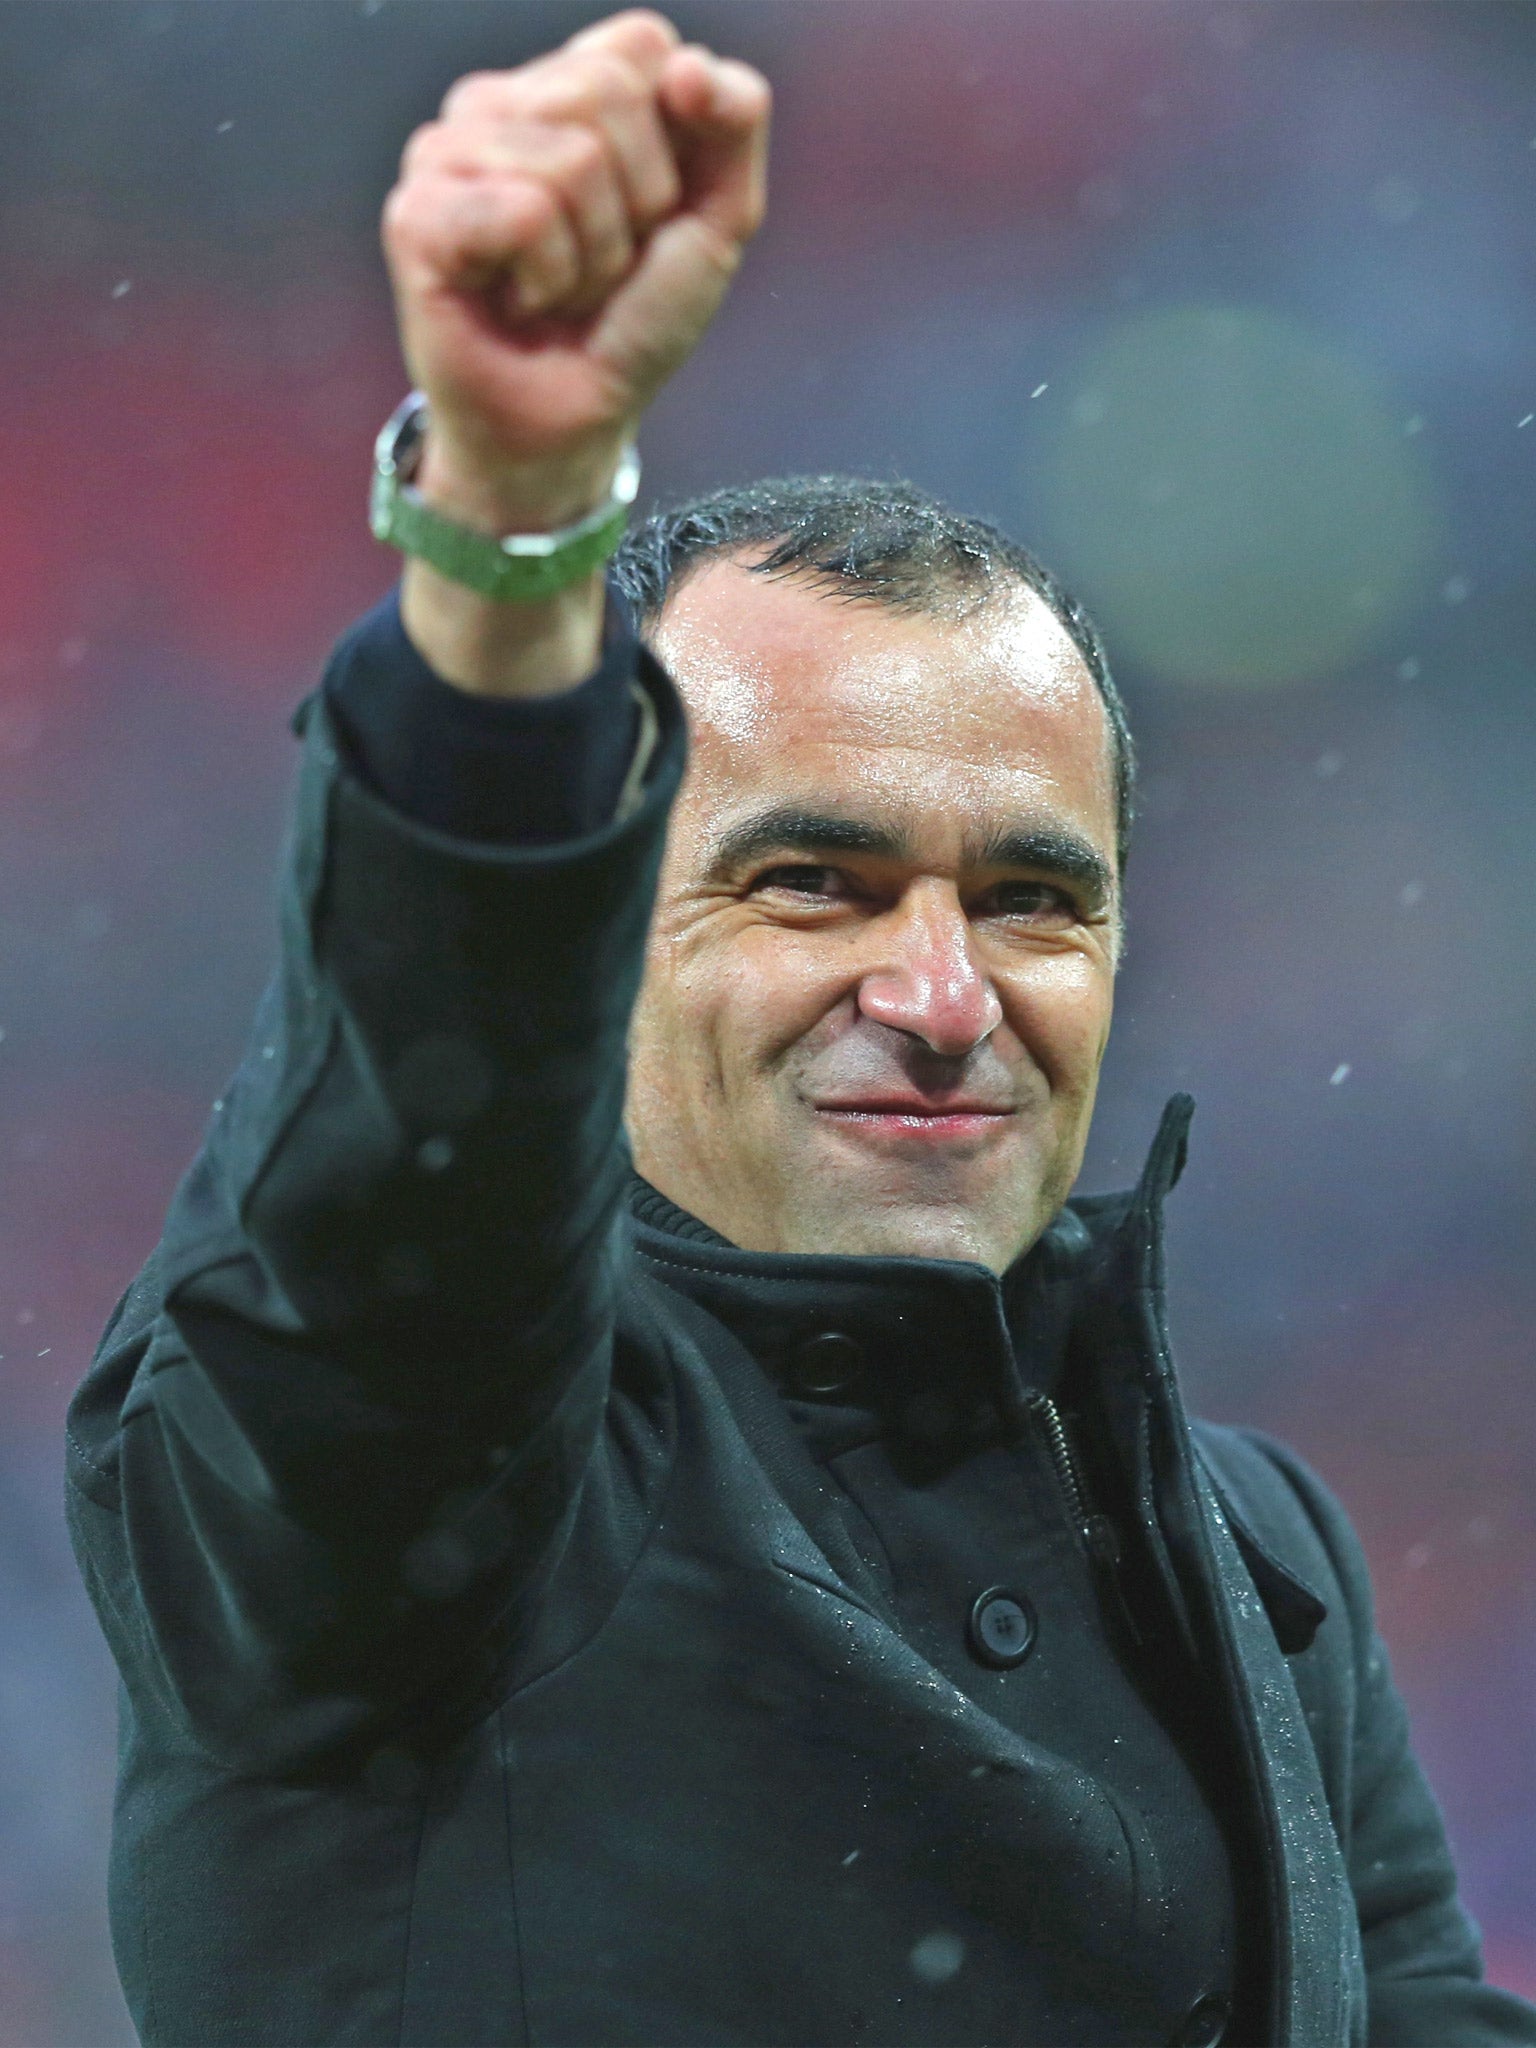 Roberto Martinez says tonight is more important than the Cup final